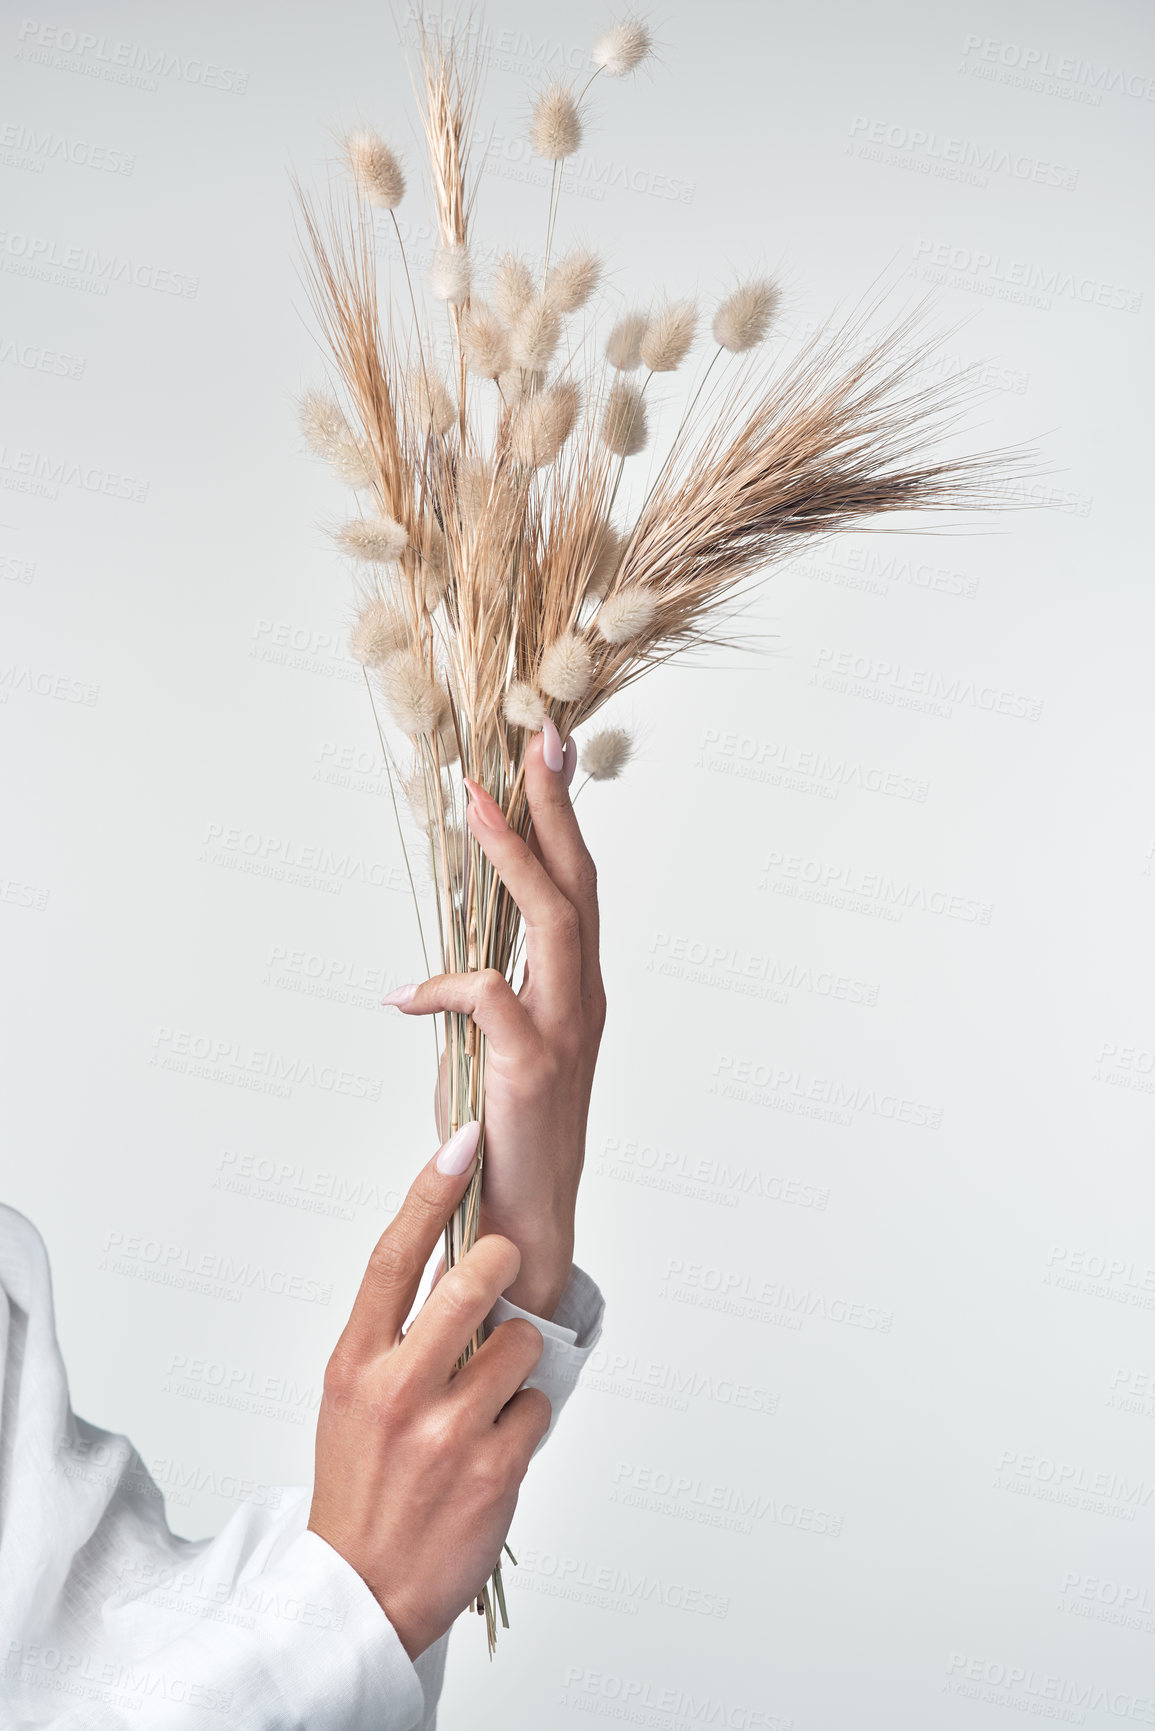 Buy stock photo Cropped shot of an unrecognizable woman holding a bunch of wheat ears